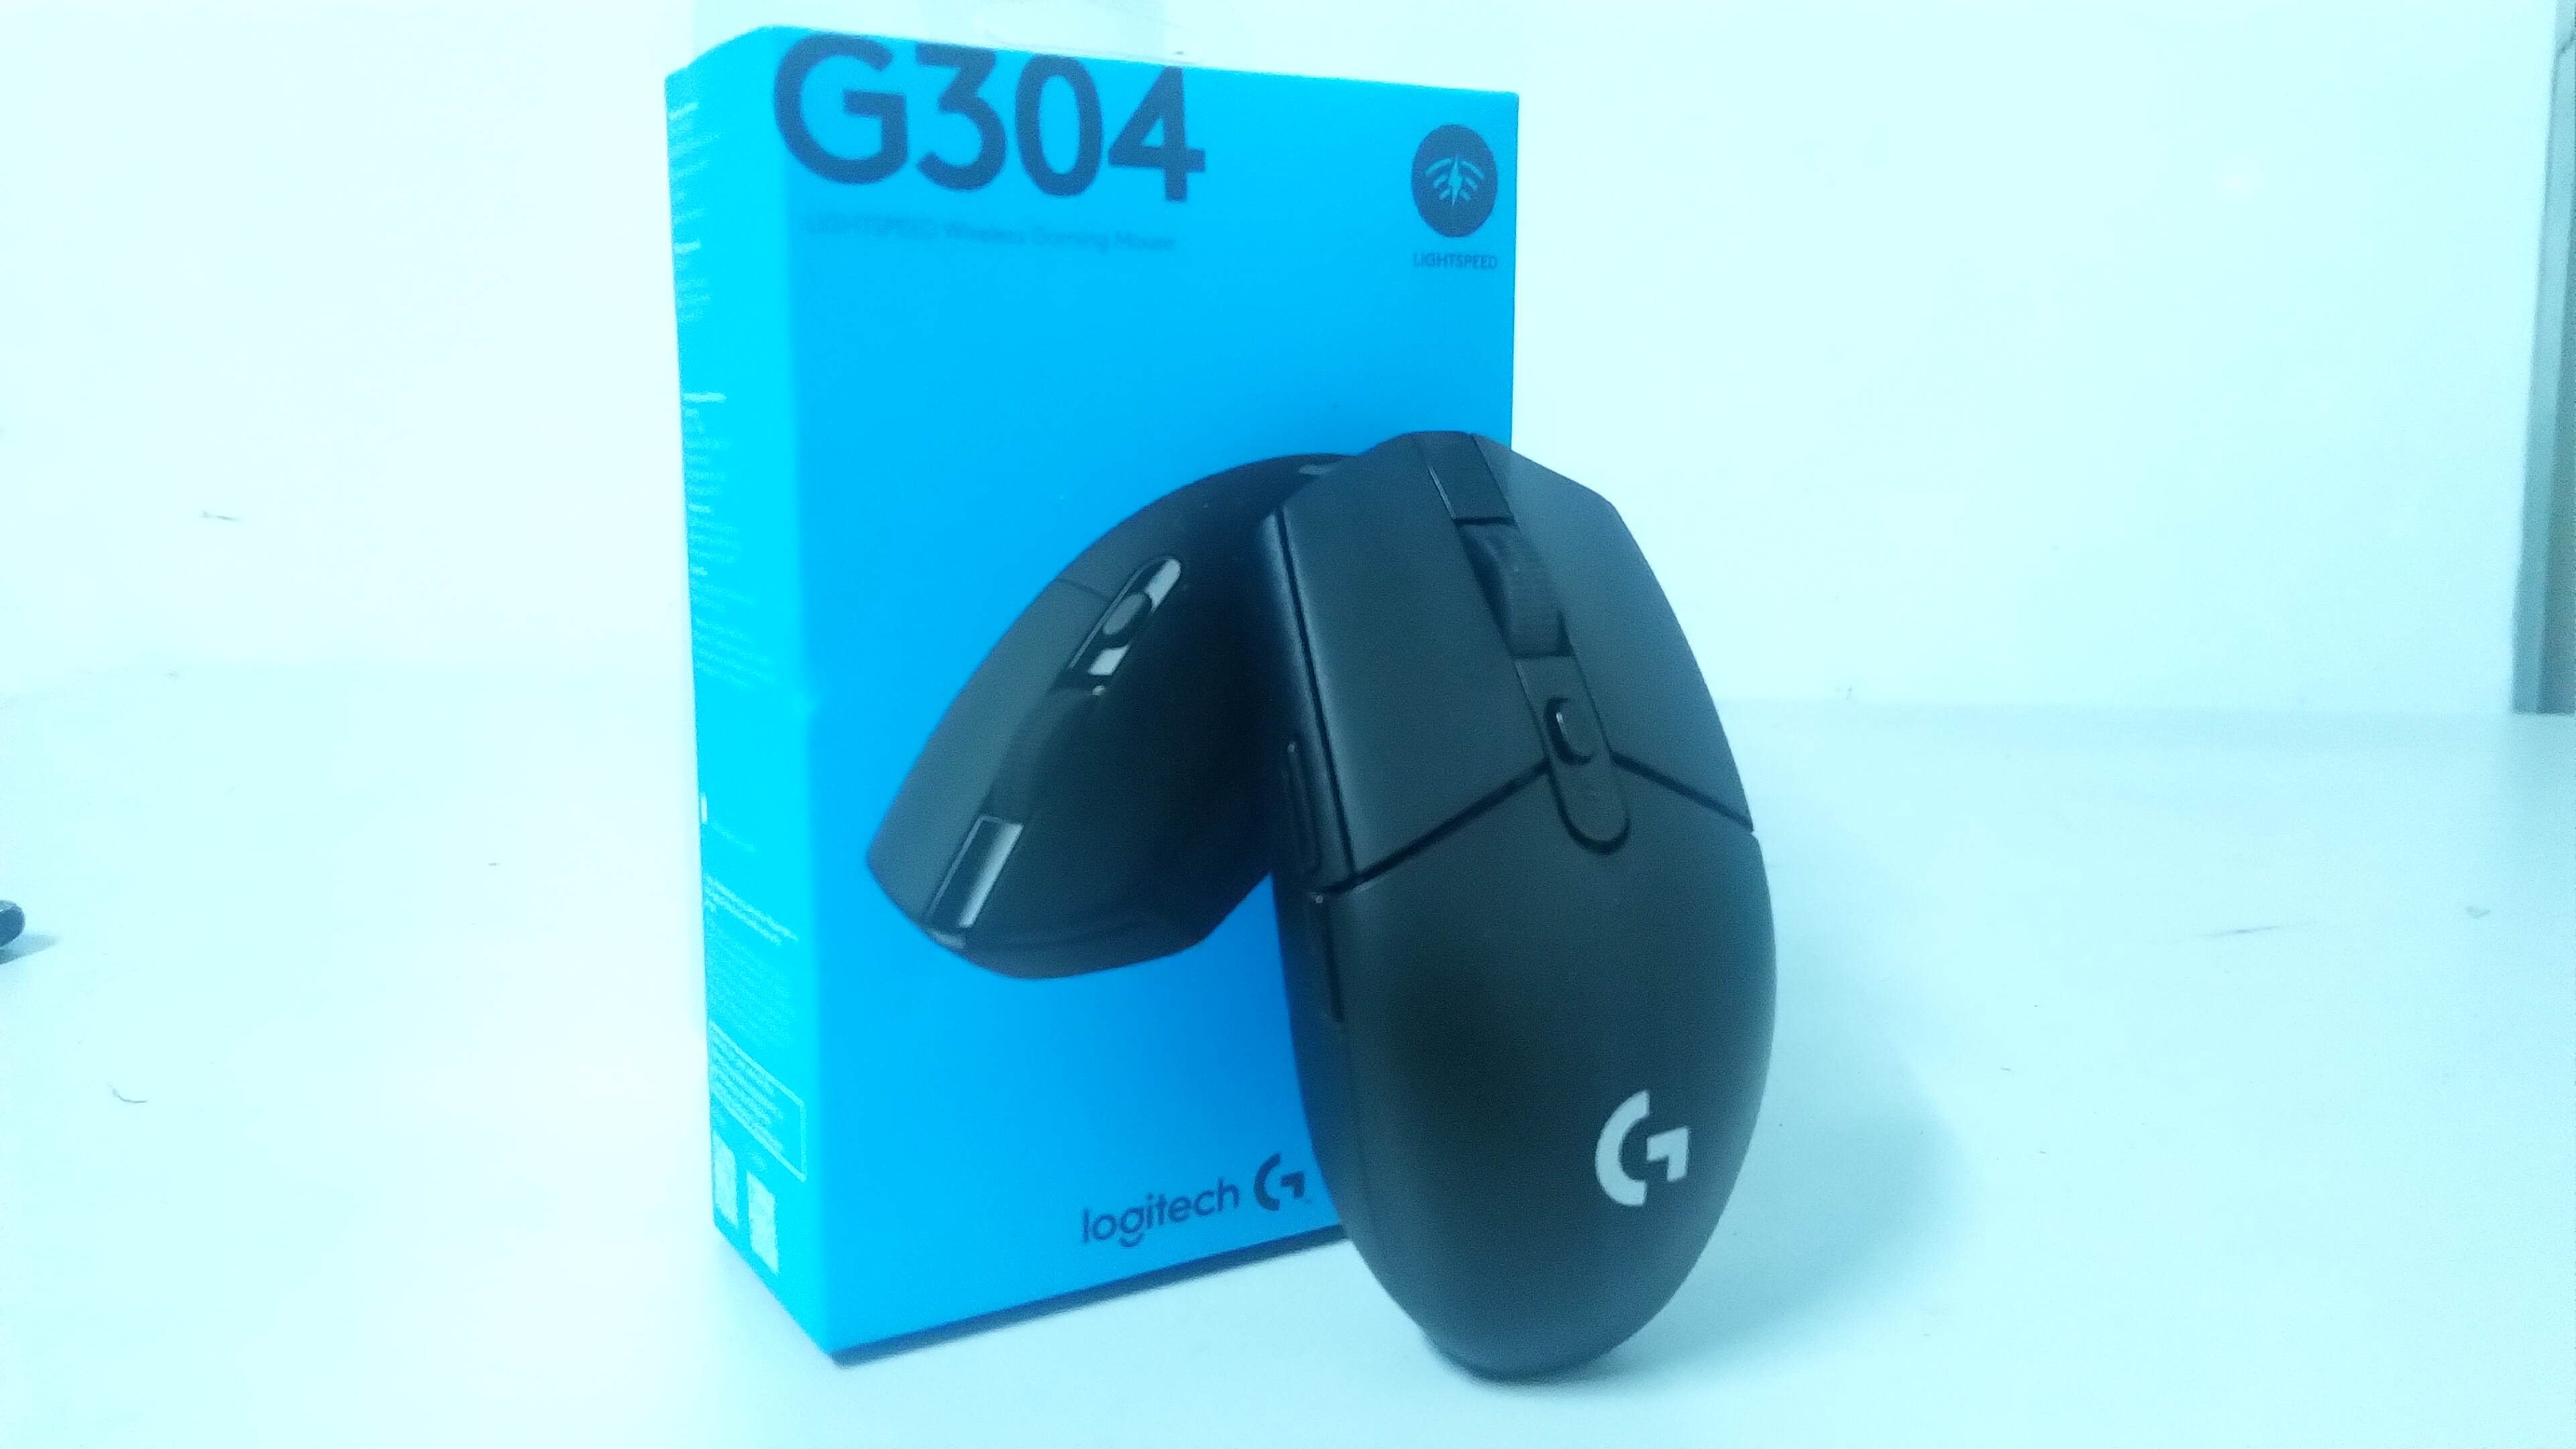 28-day old G304